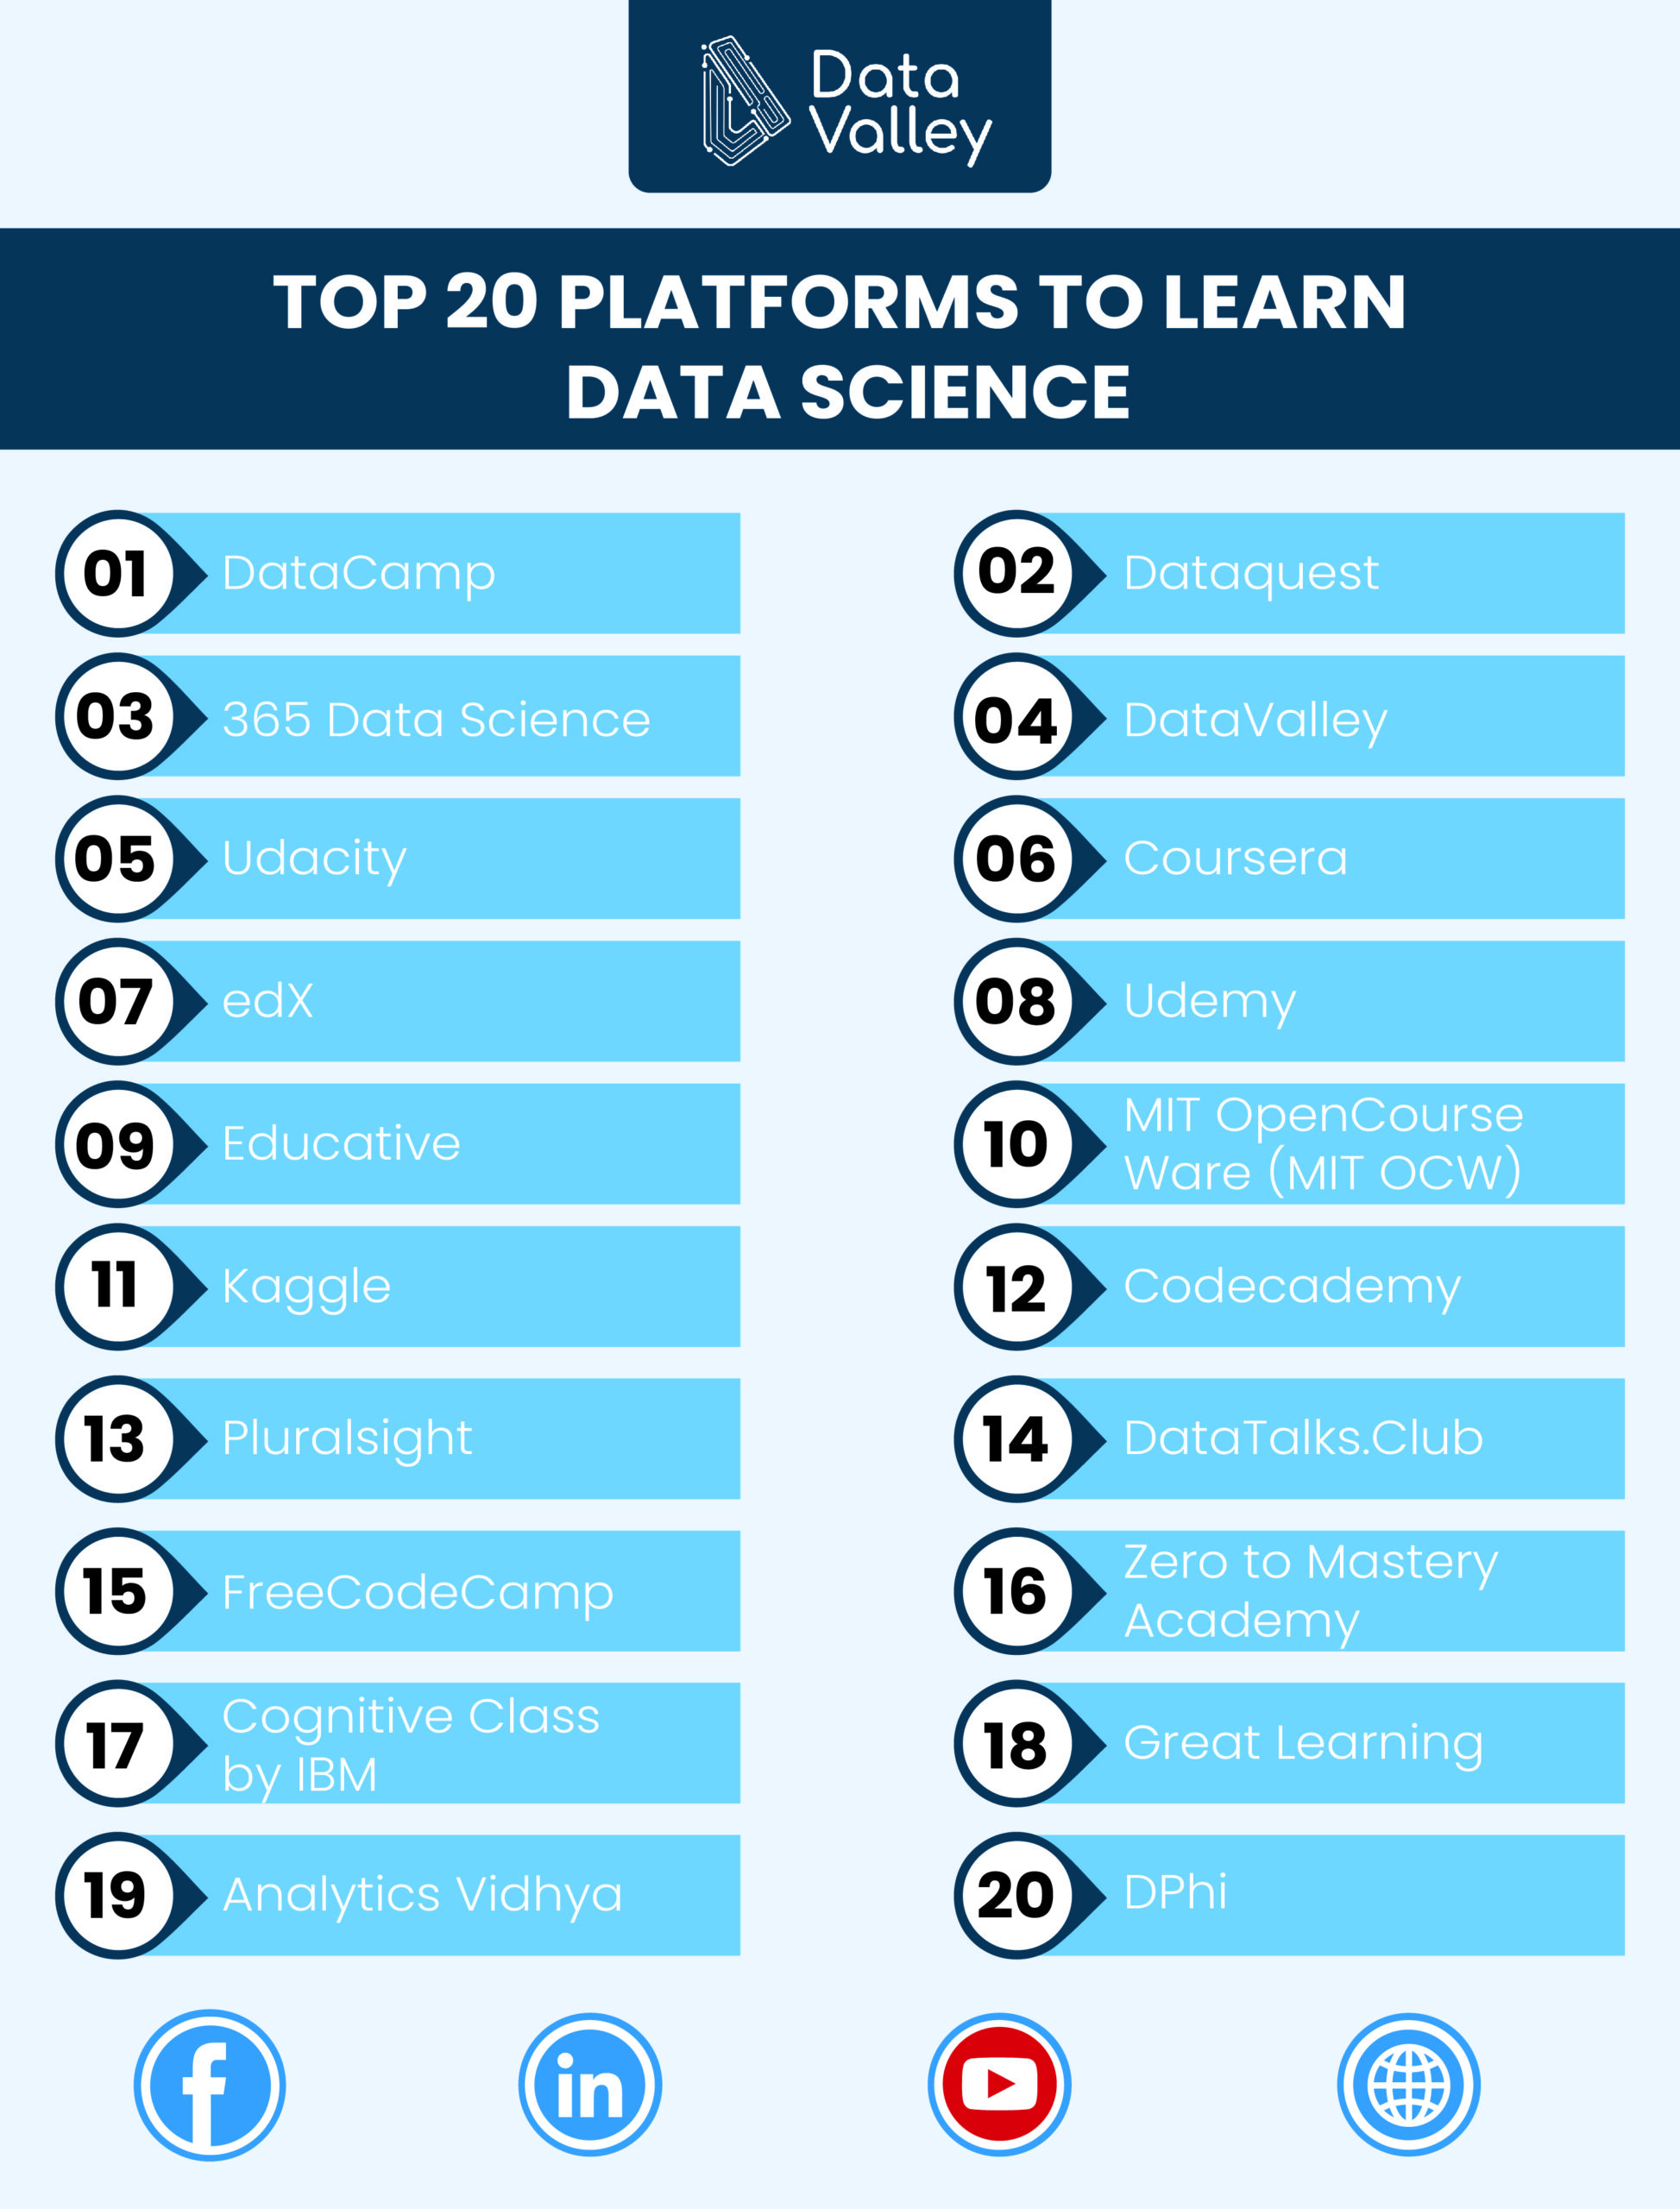 Top 20 Platforms to Learn Data Science